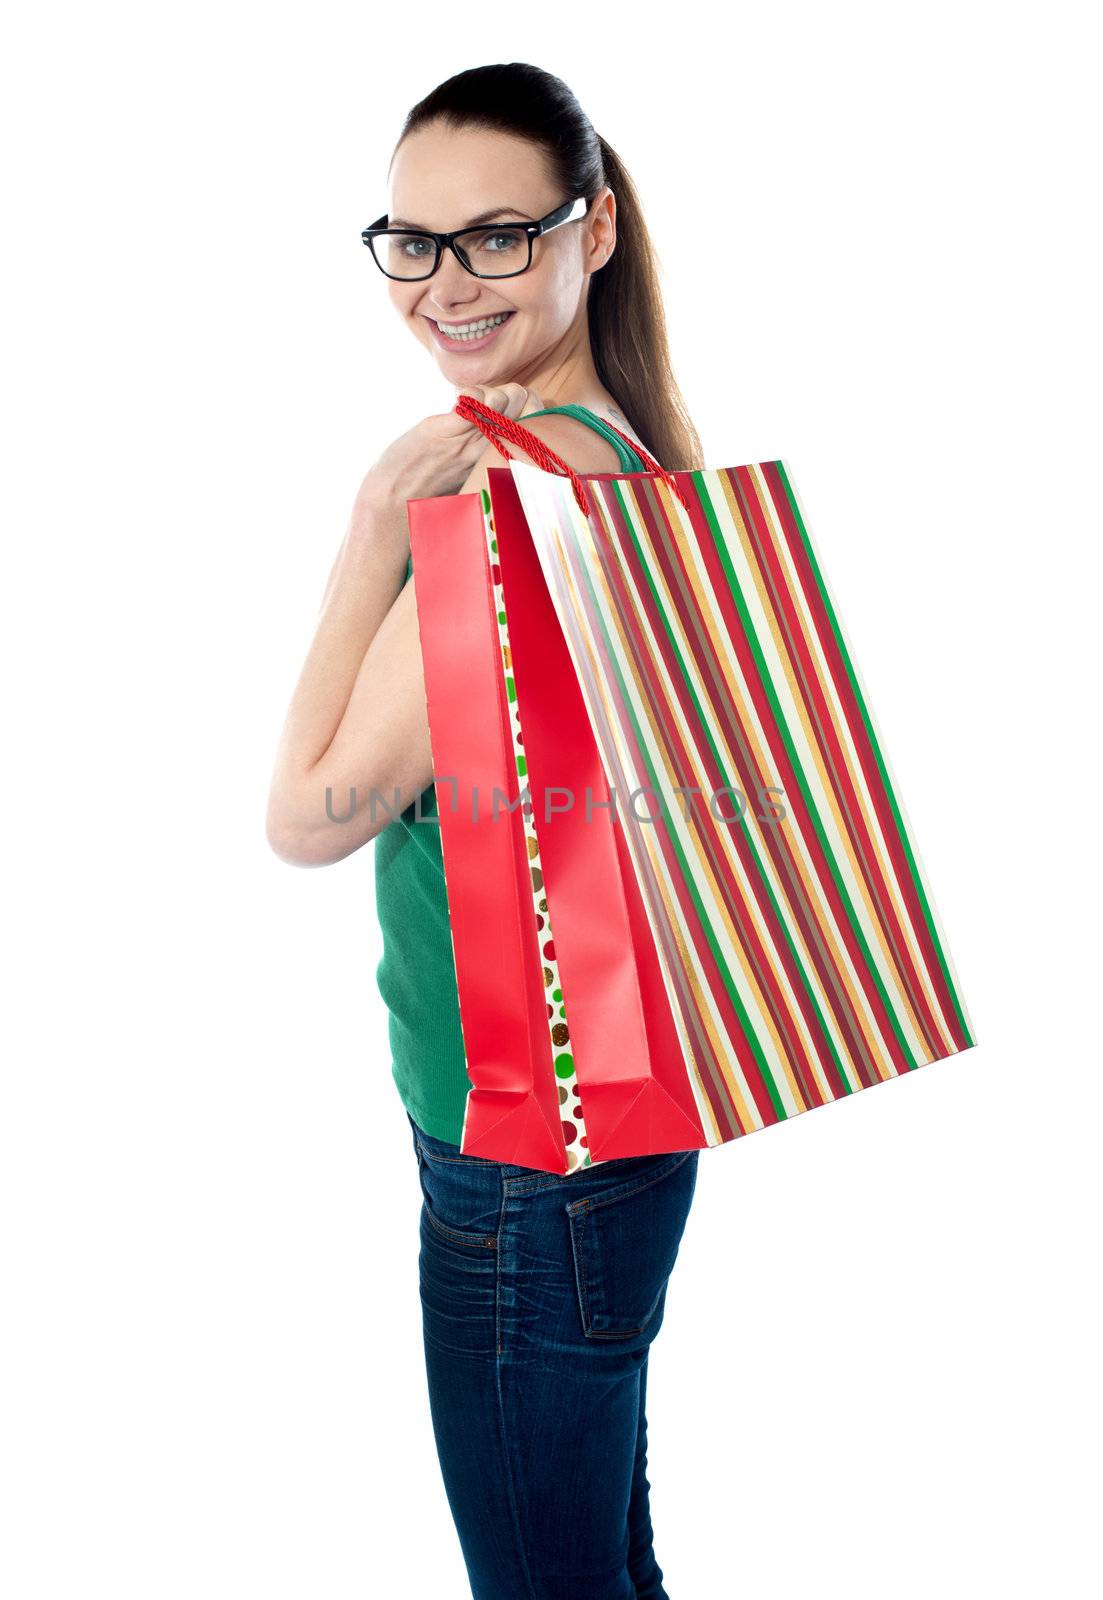 Side view of woman holding shopping bags against white background